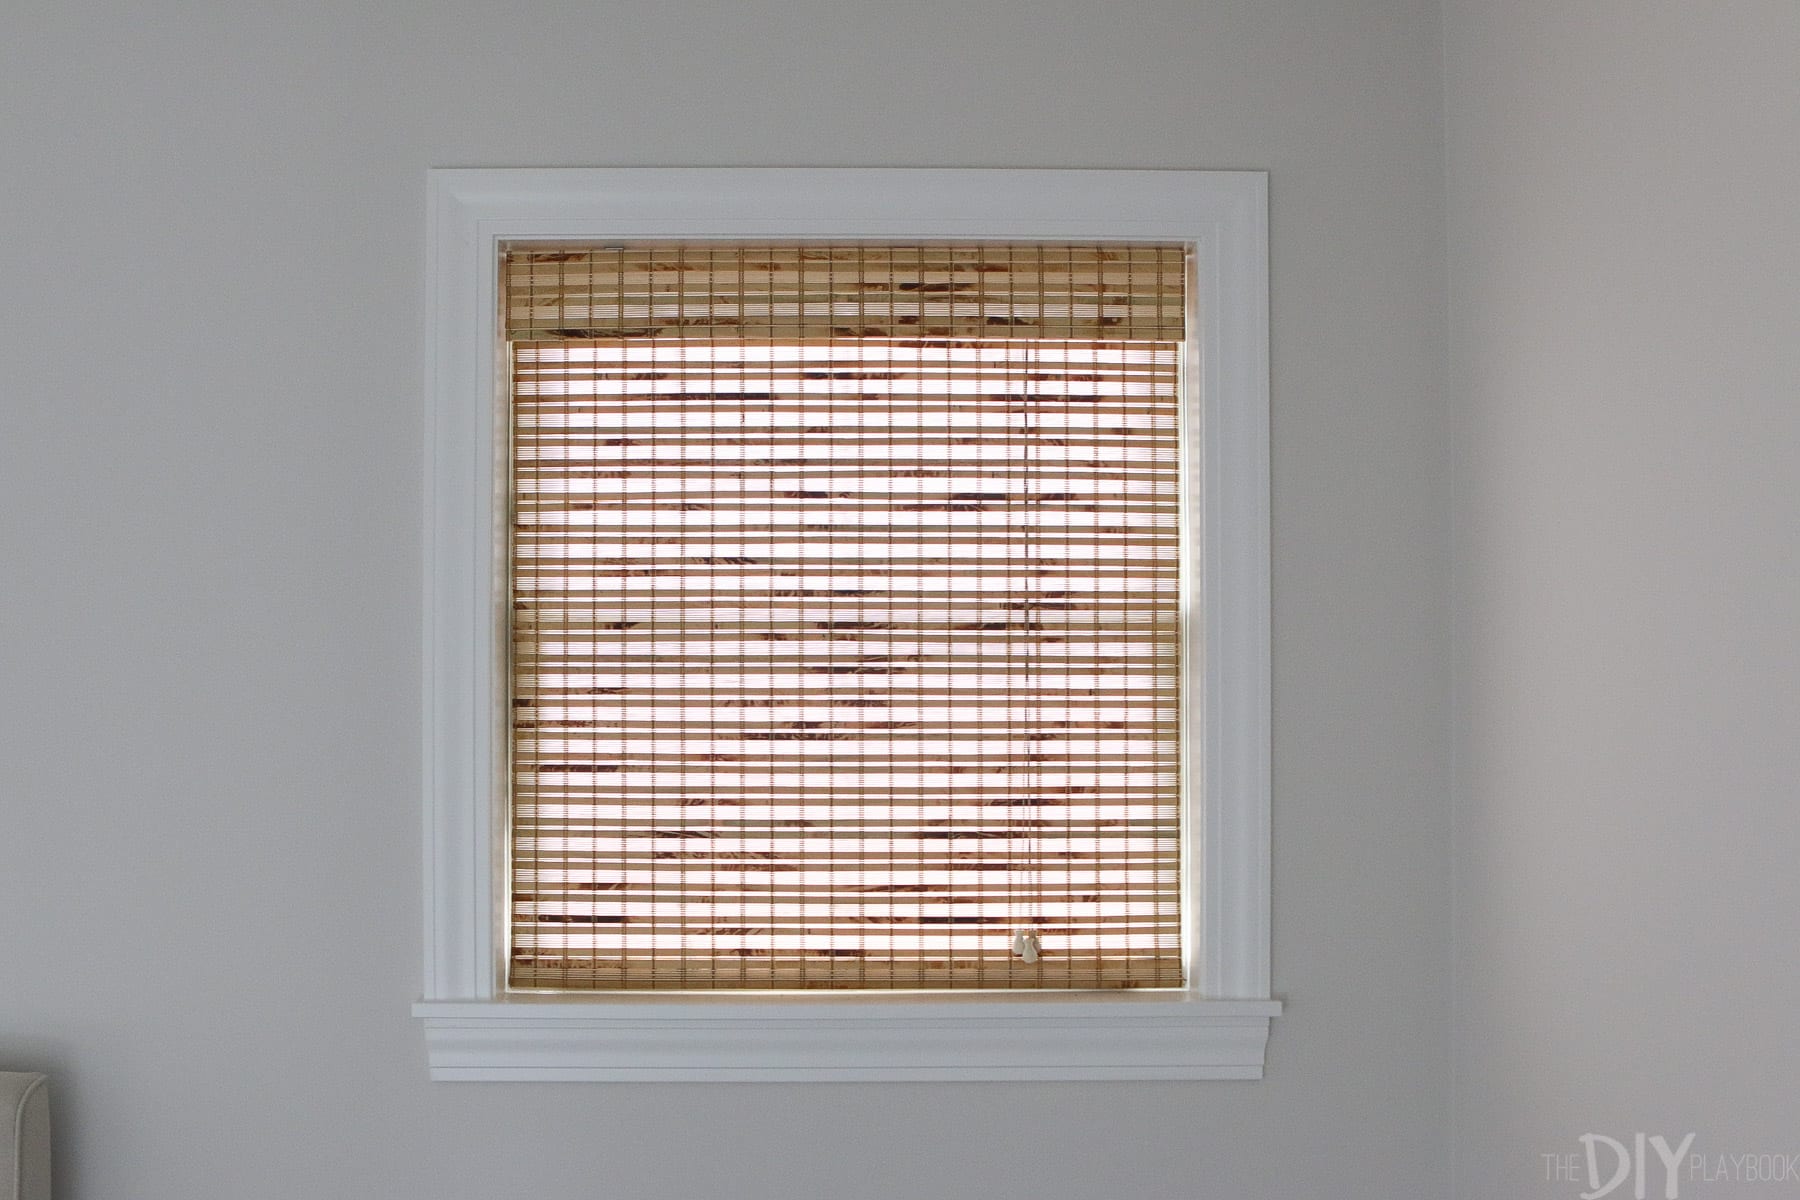 bamboo shades provide privacy in a bedroom and texture